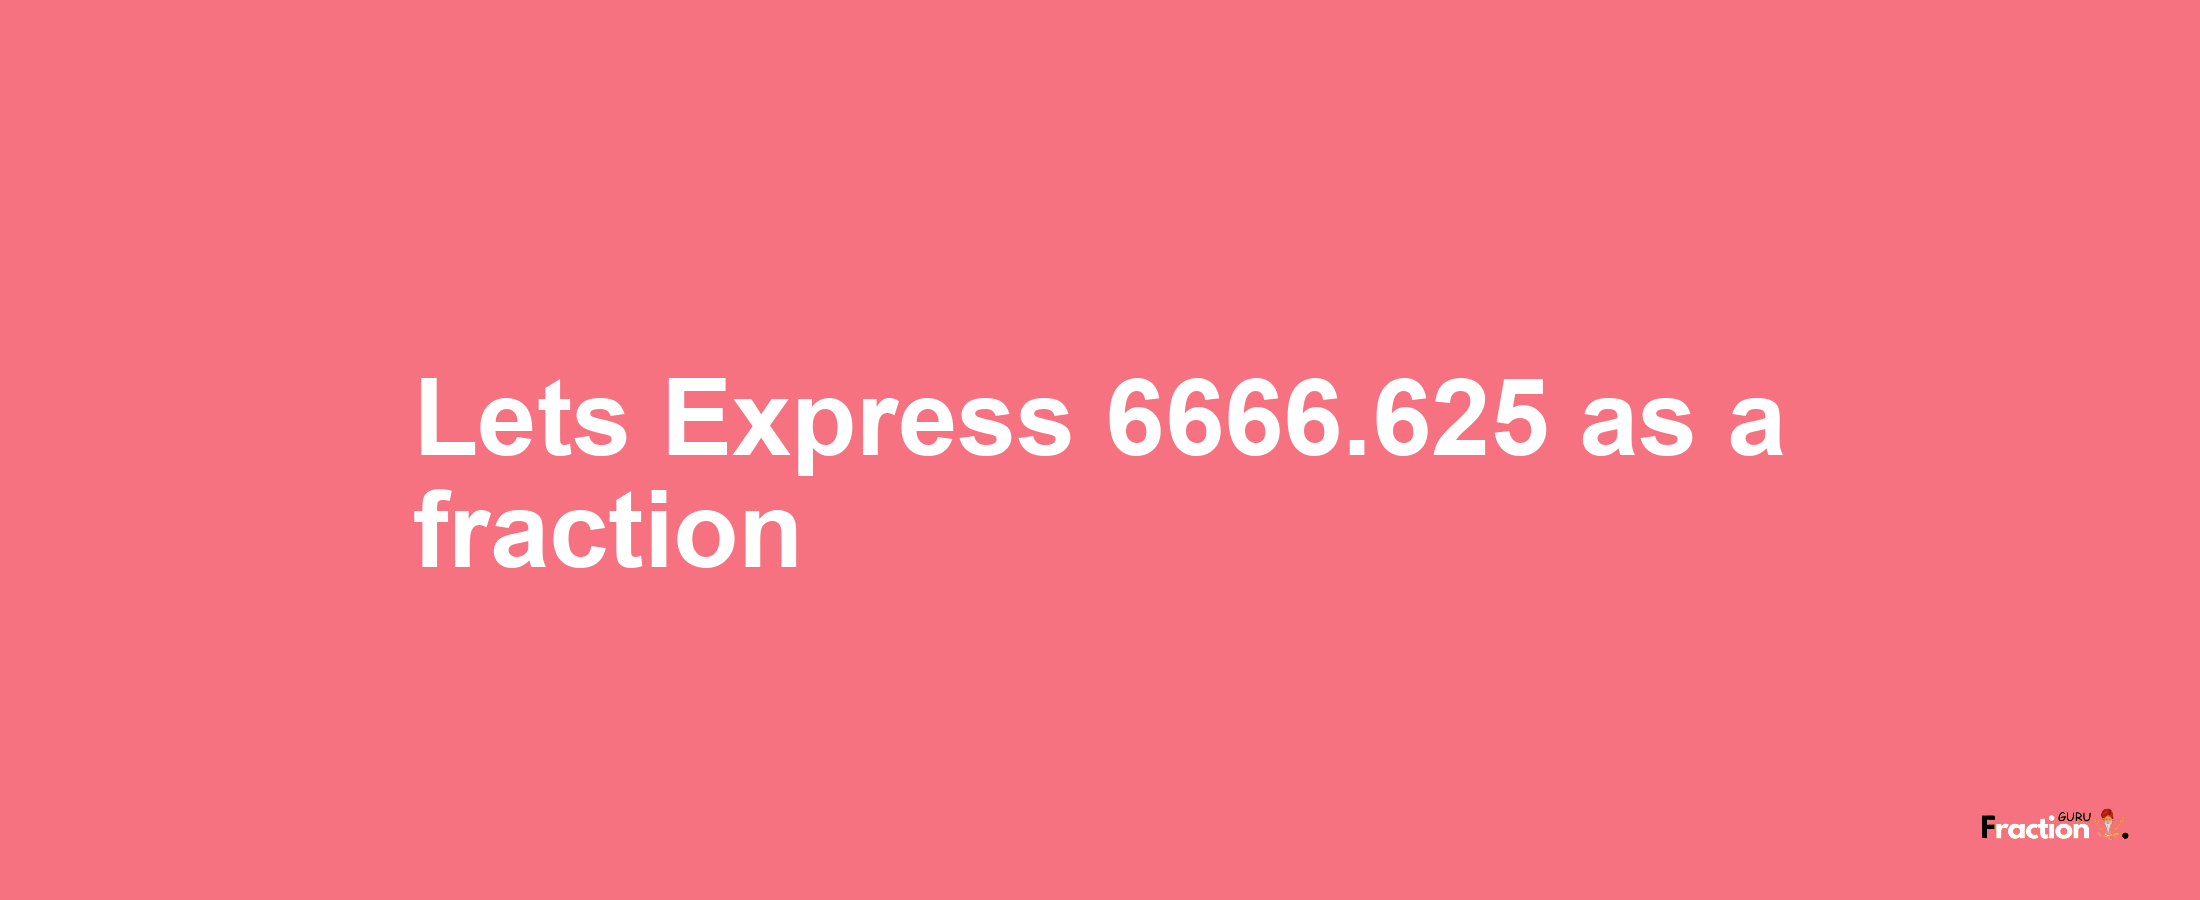 Lets Express 6666.625 as afraction